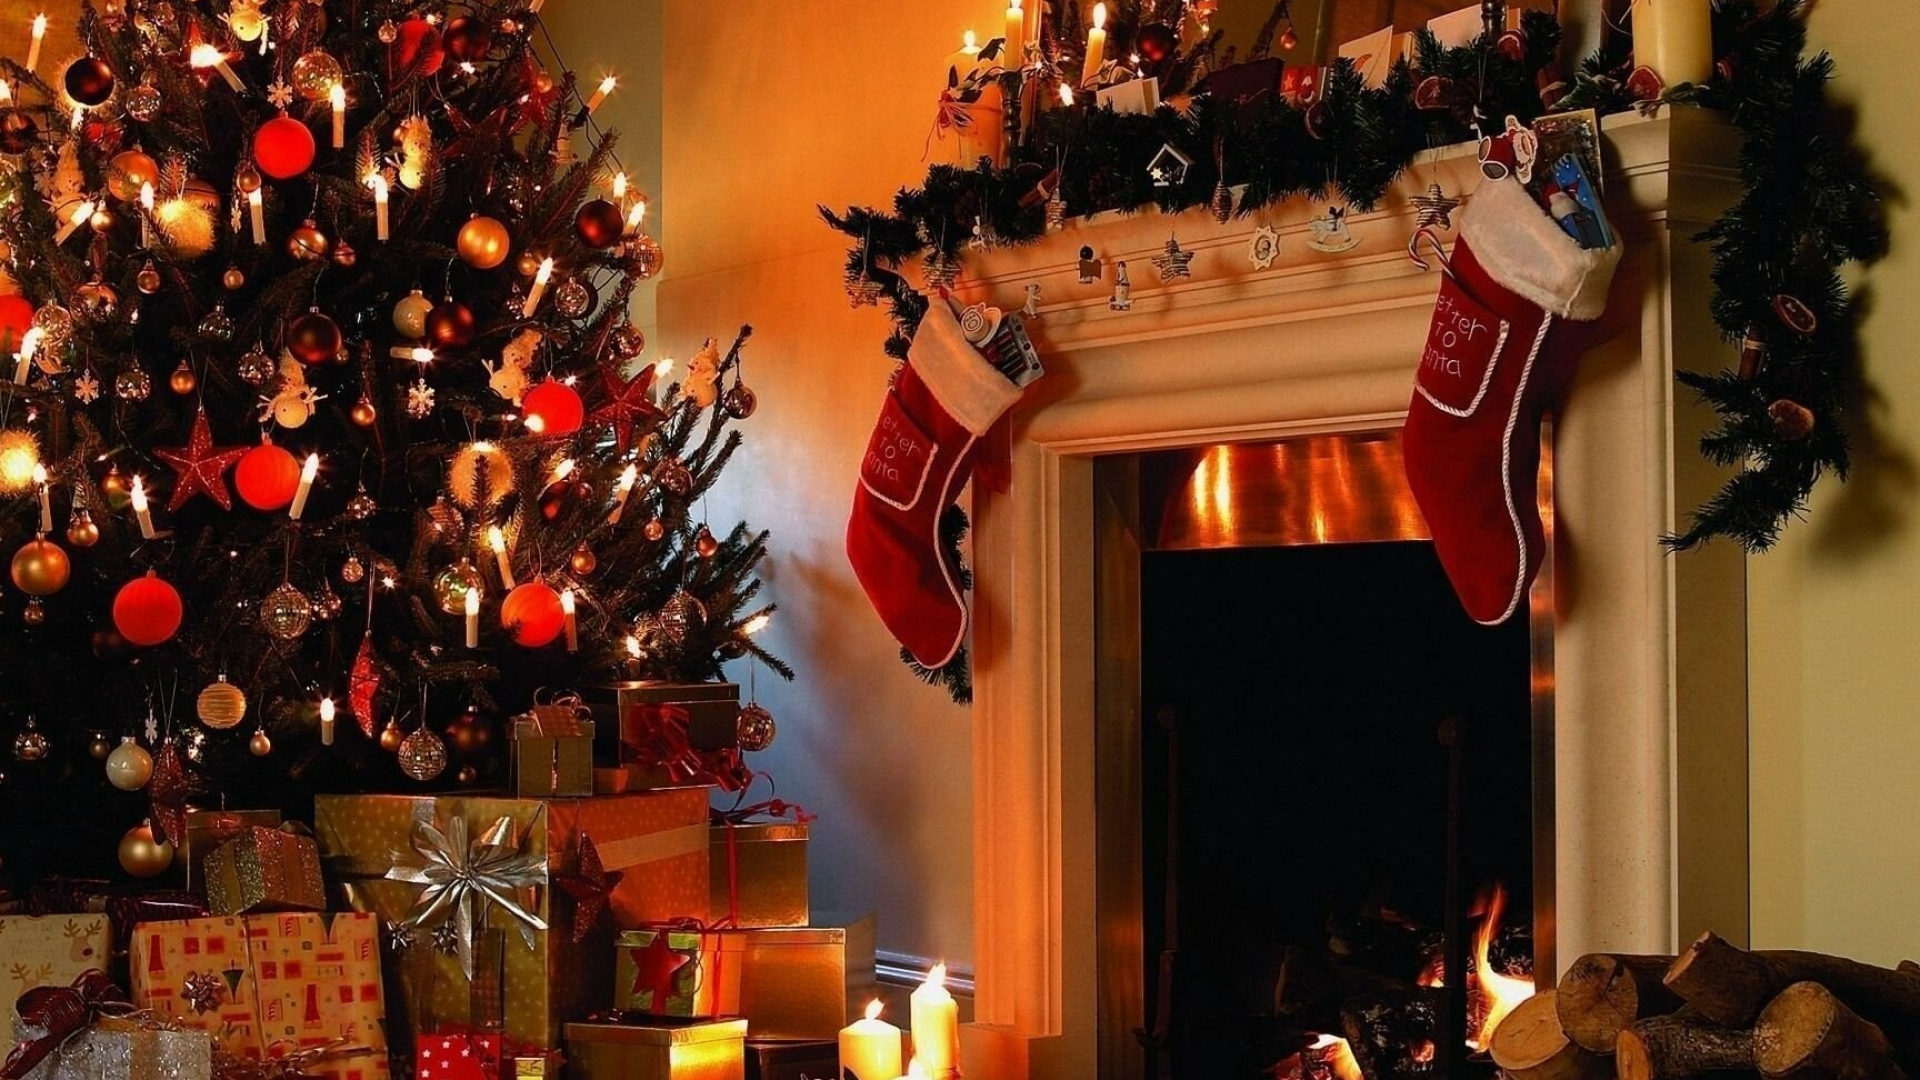 Christmas Fireplace: Lighting, Holiday ornament, Gifts, Garlands. 1920x1080 Full HD Background.